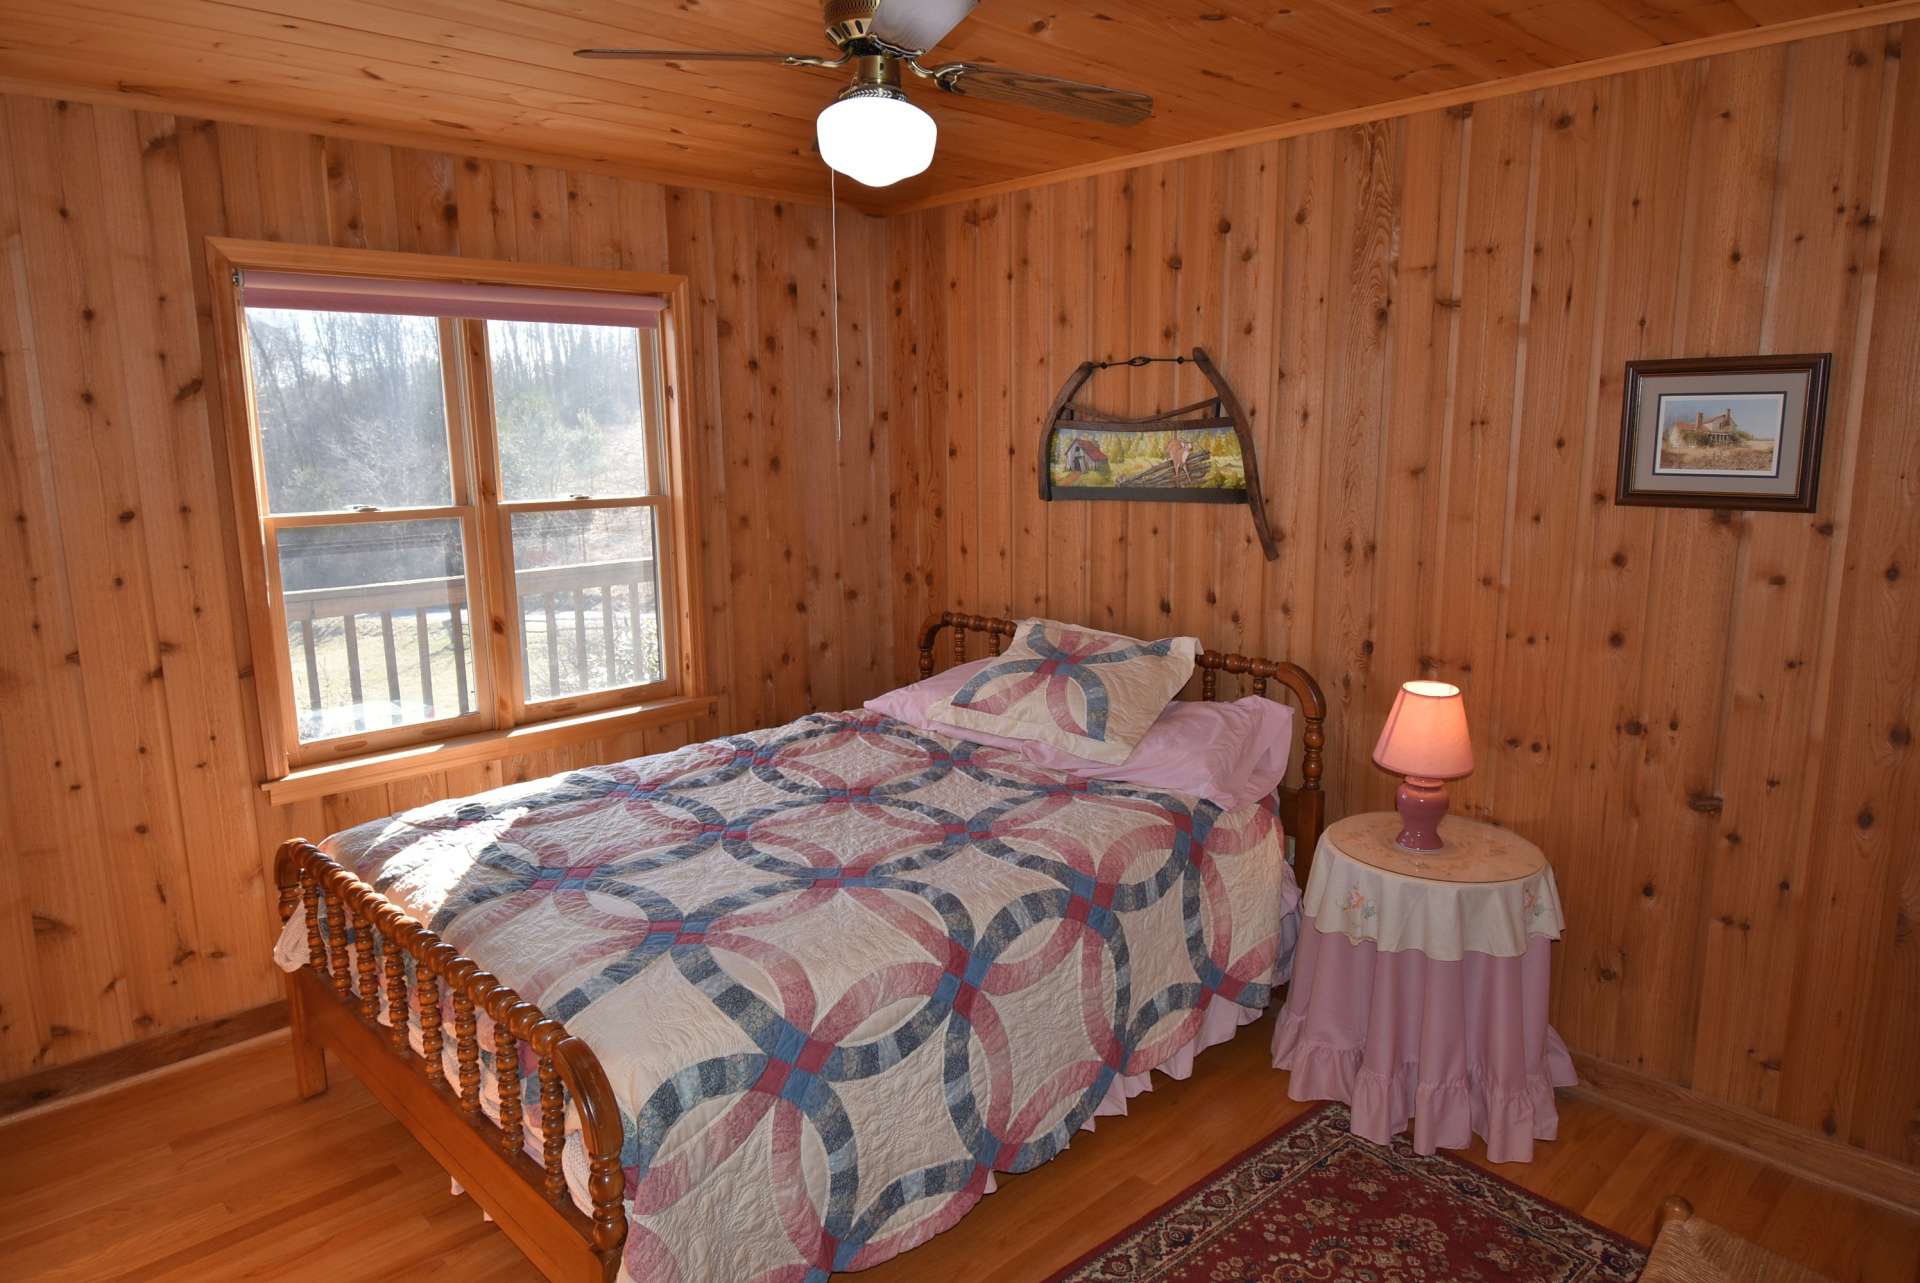 The main level bedroom is spacious and has the rustic country feel.